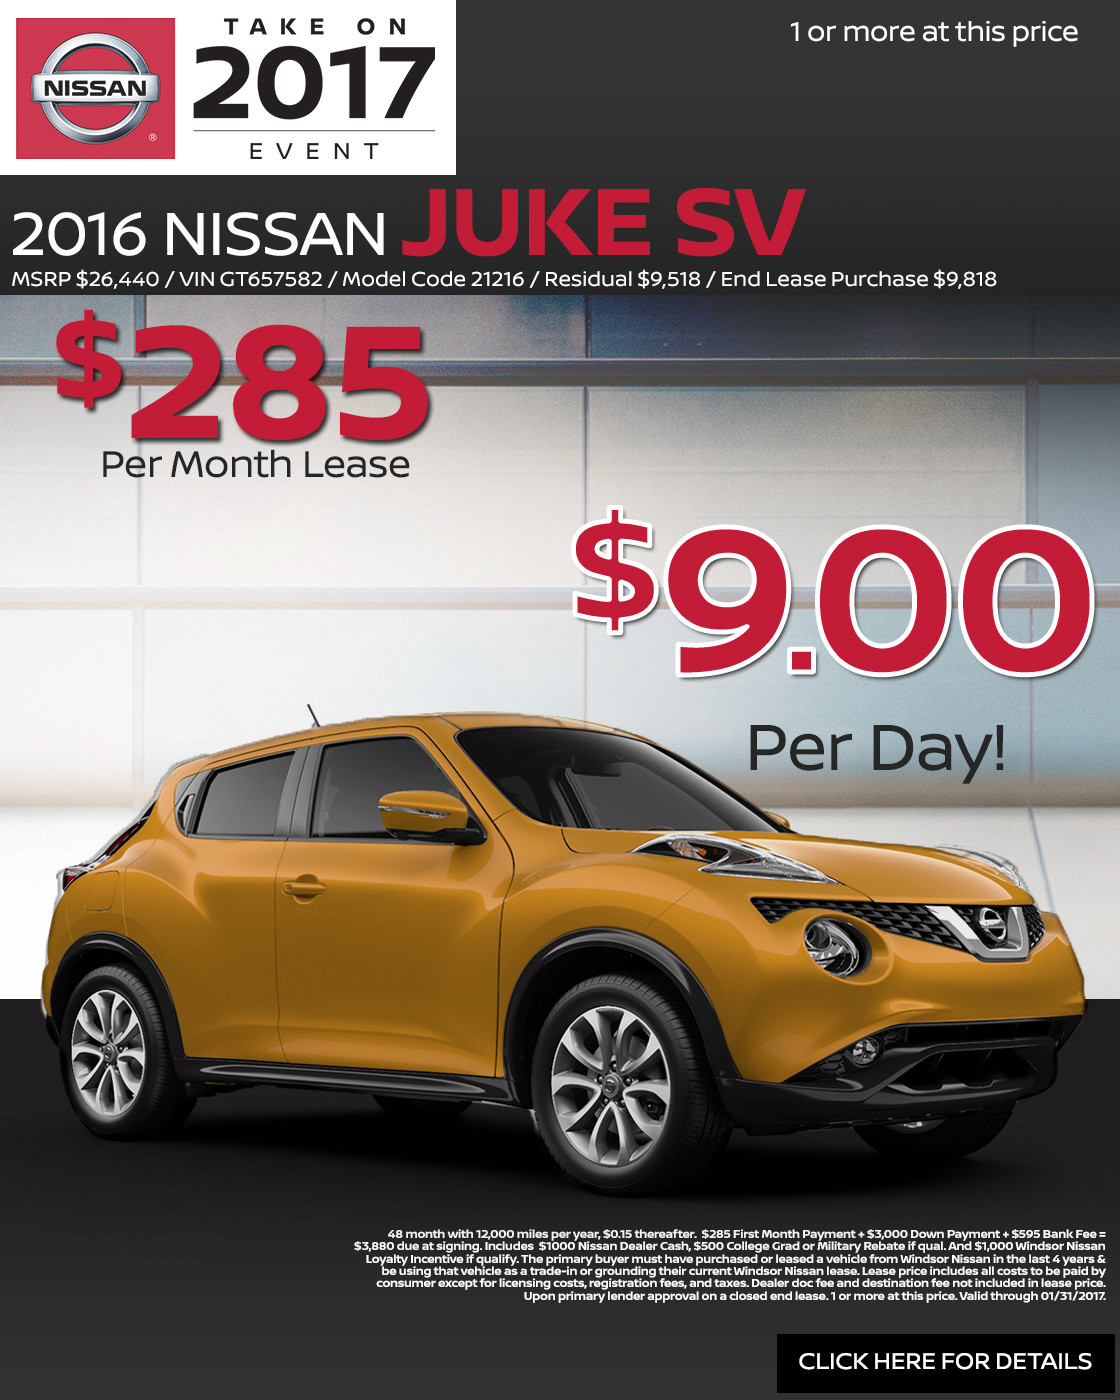 Nissan Monthly Lease Deals